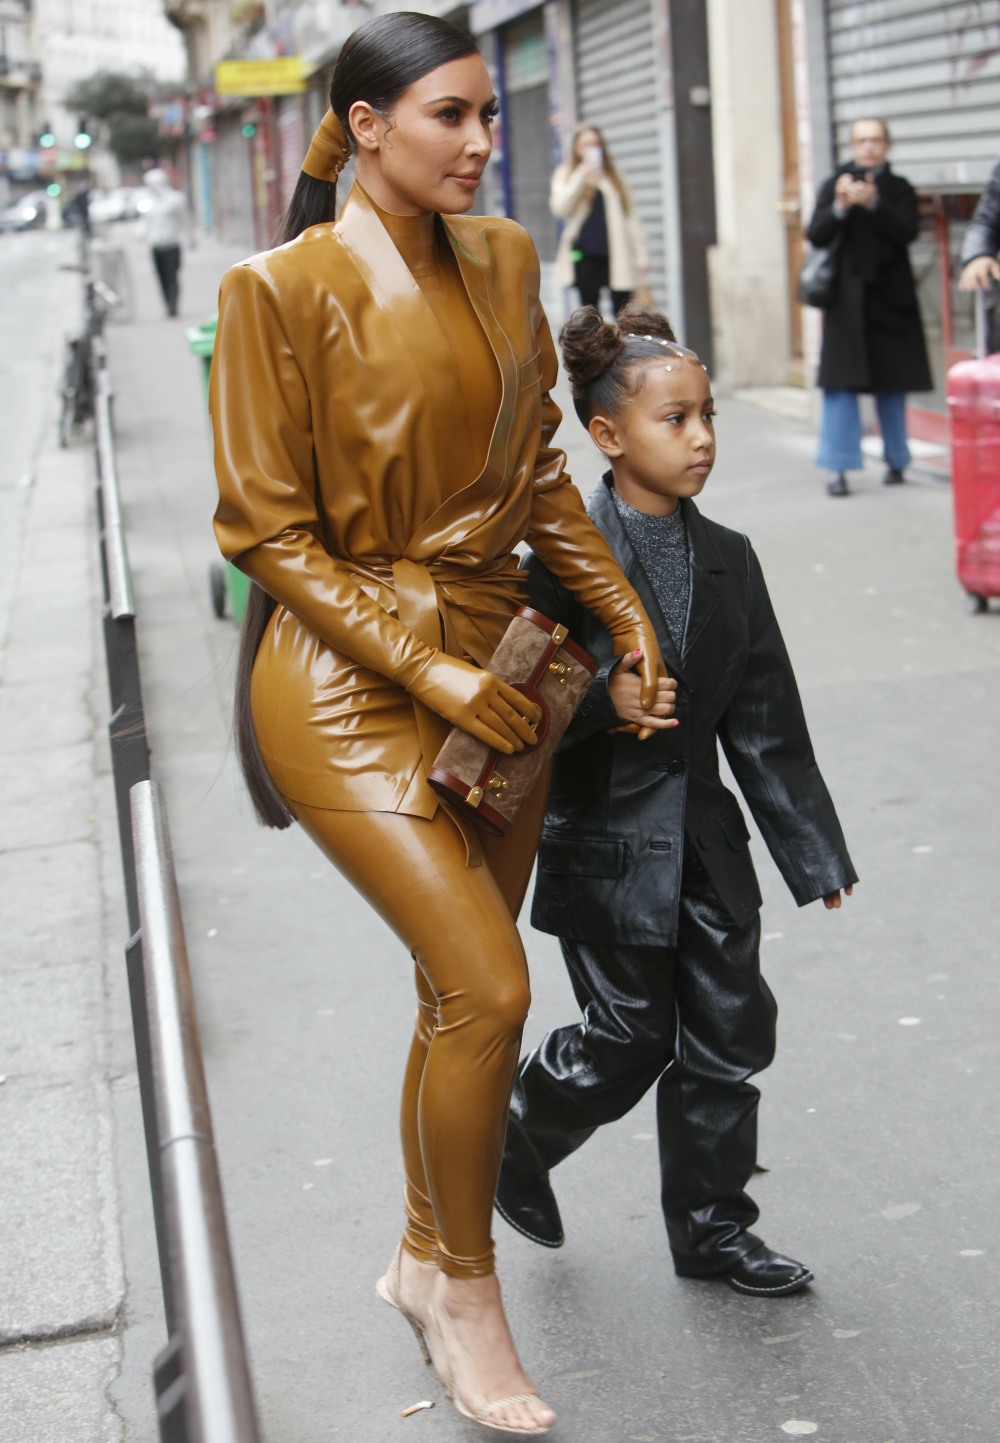 Kim Kardashian, her daughter North West, Kourtney Kardashian and her daughter Penelope Disick go to the "Sunday Service" of Kanye West in Paris